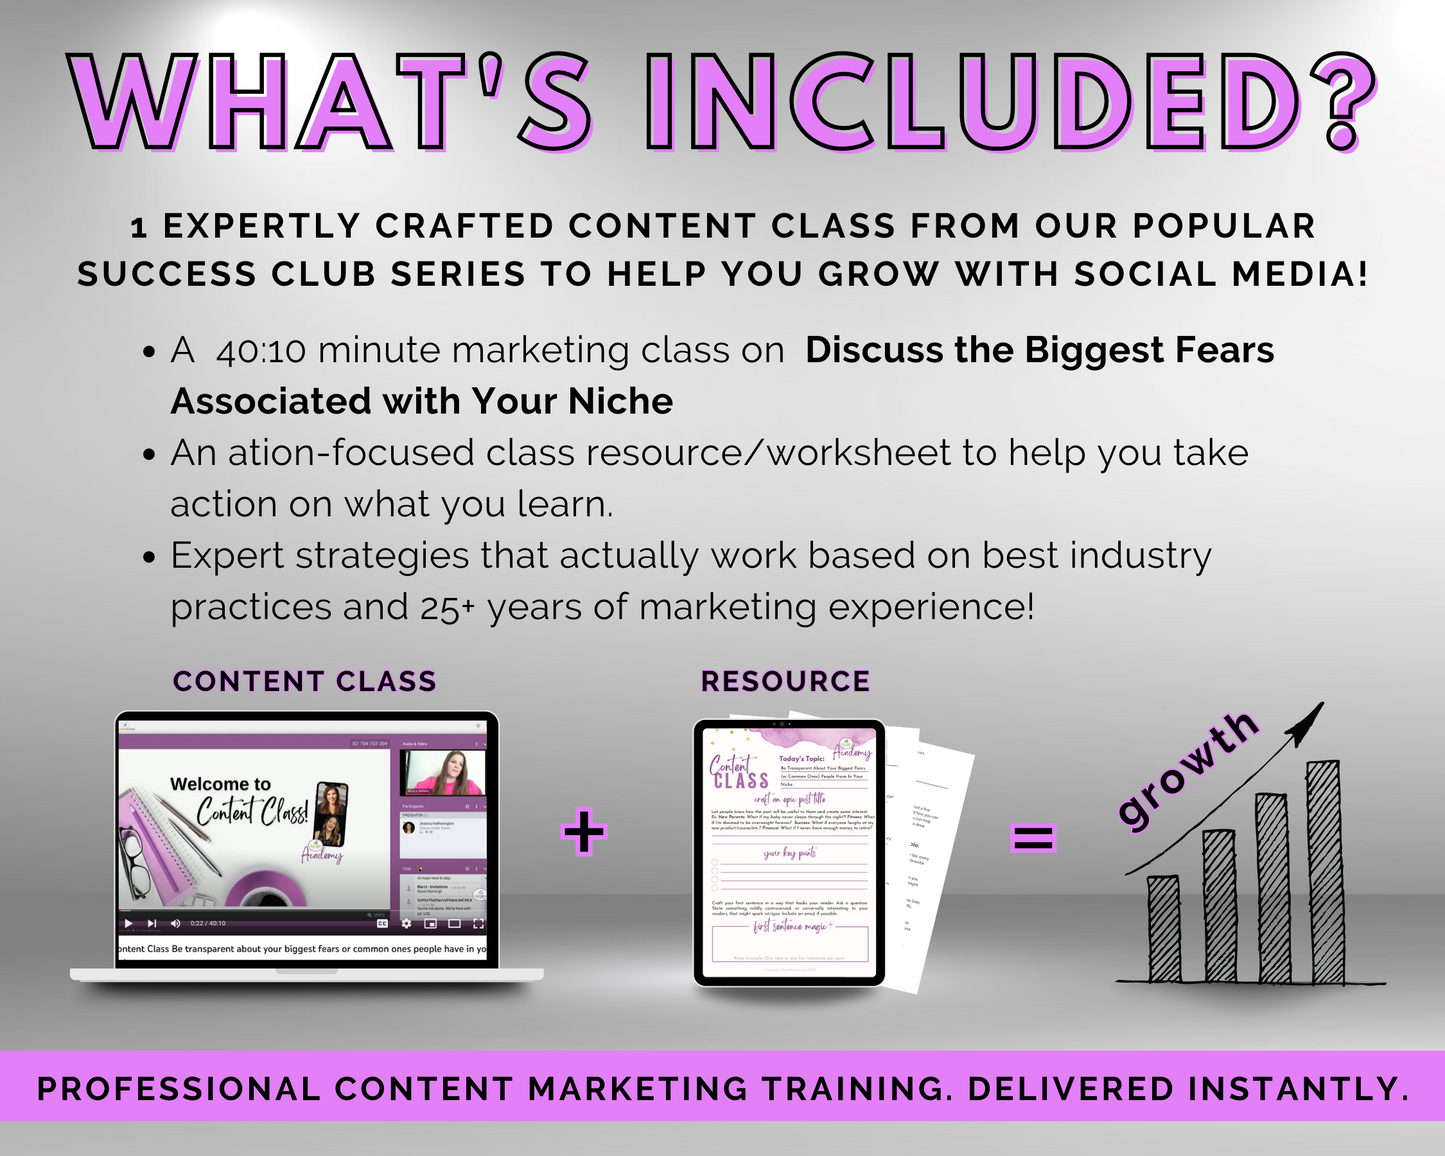 Content Class - Discuss the Biggest Fears Associated with Your Niche Masterclass